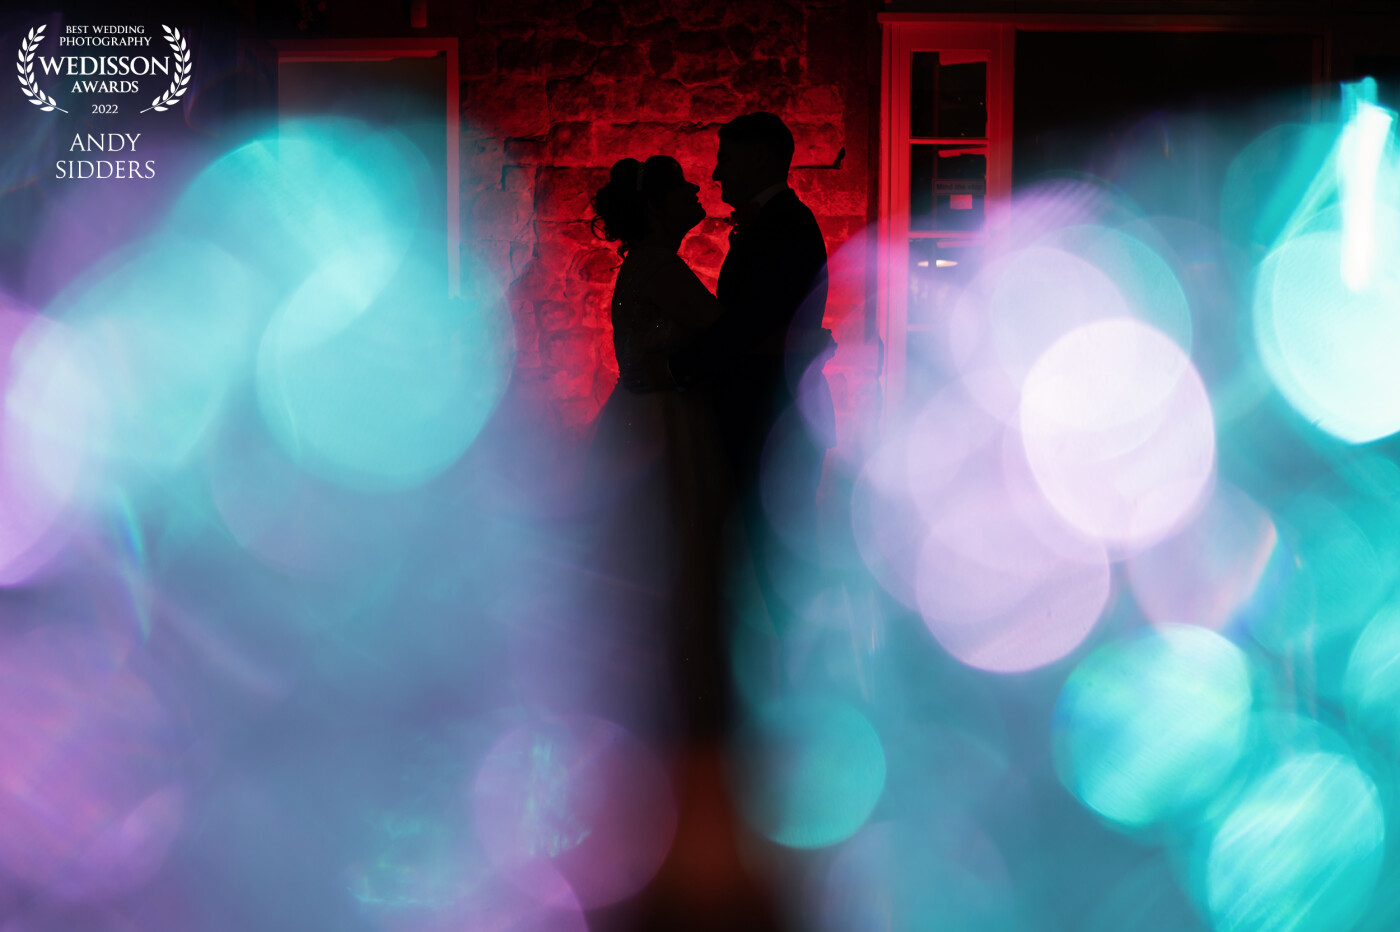 I created a silhouette of my bride and groom and created foreground interesting foreground for the image by lighting a few glass candle holders.<br />
<br />
This image was taken at Knowle Country House, in Kent.